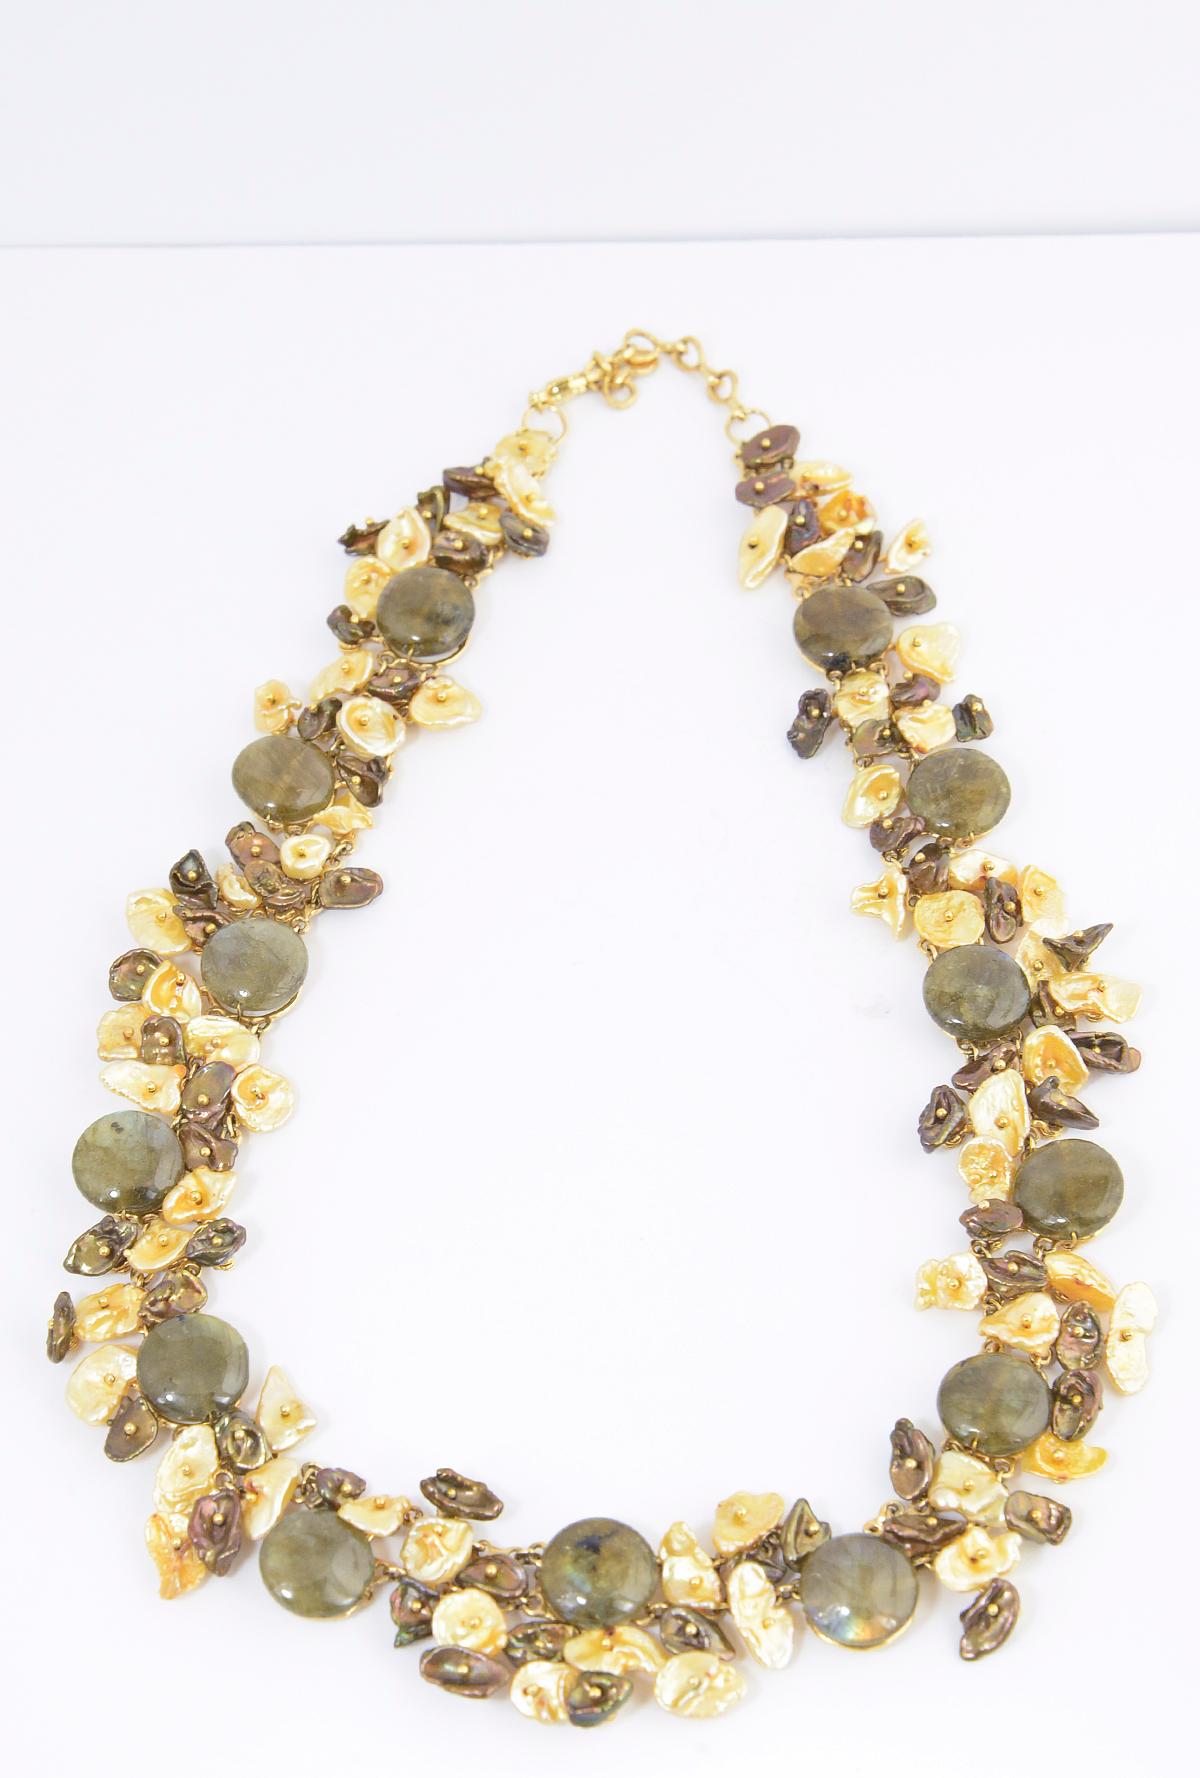 Handmade 14K yellow gold, keshi pearl, and labradorite necklace. Adjustable from 16